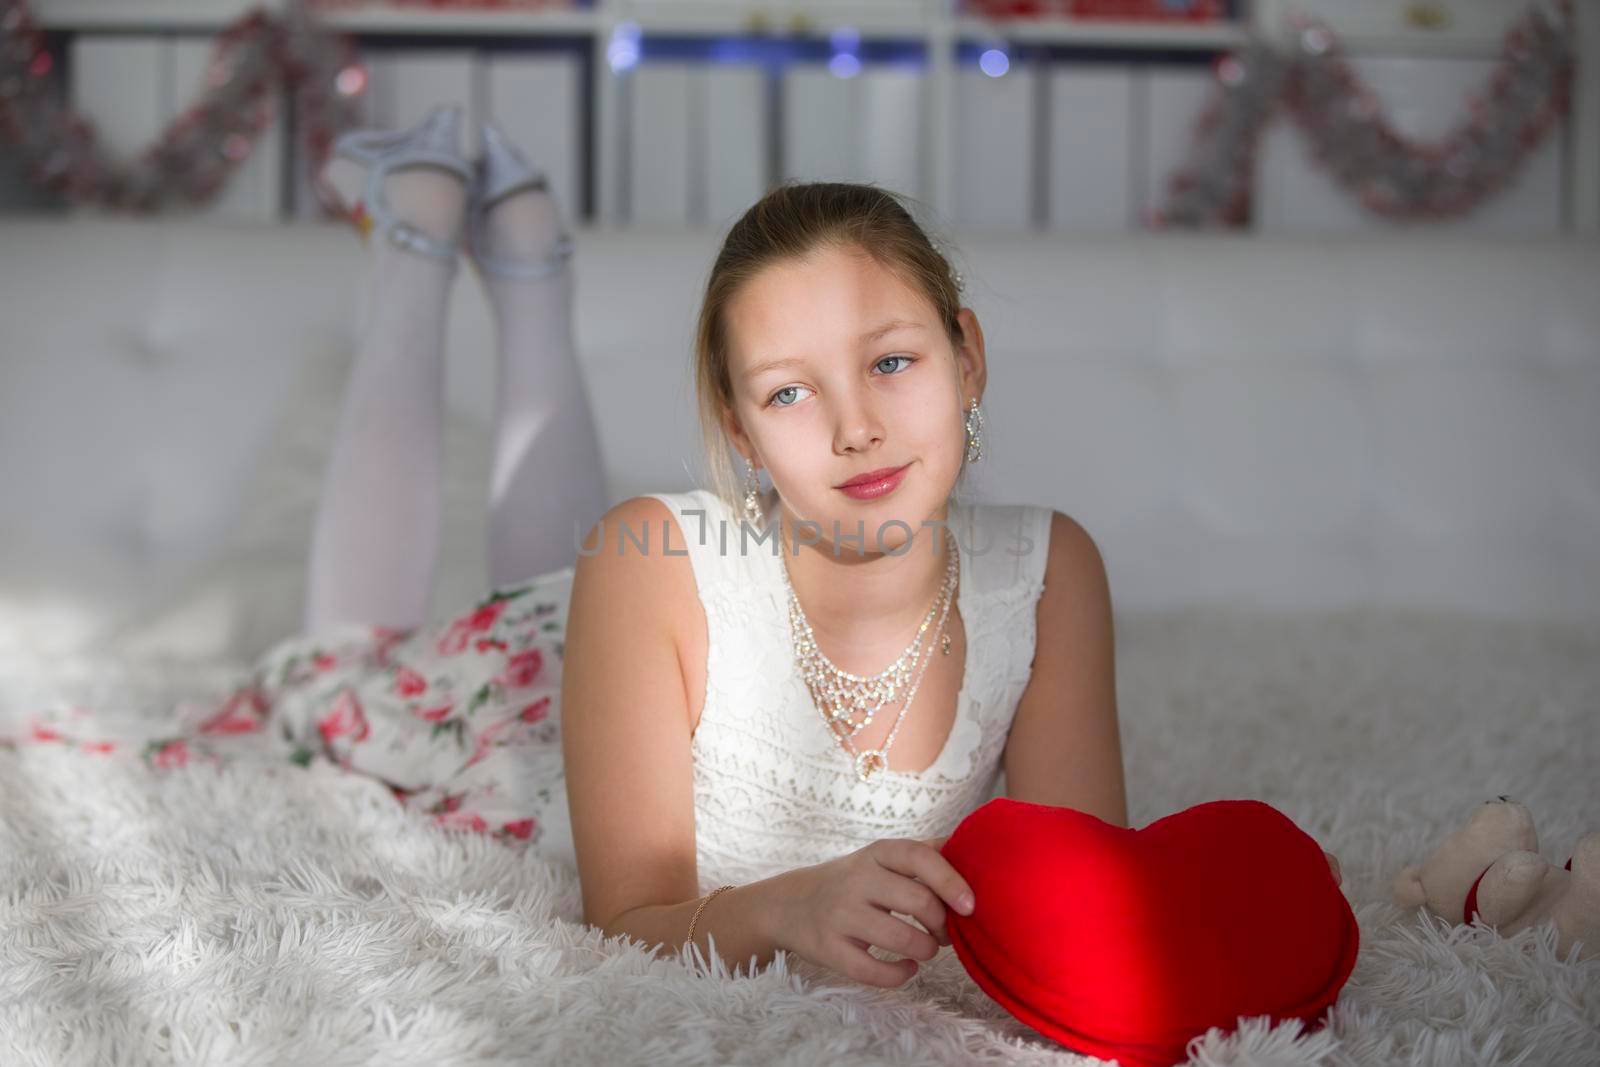 Very beautiful teen girl lying on a bed with a red heart pillow. by Sviatlana